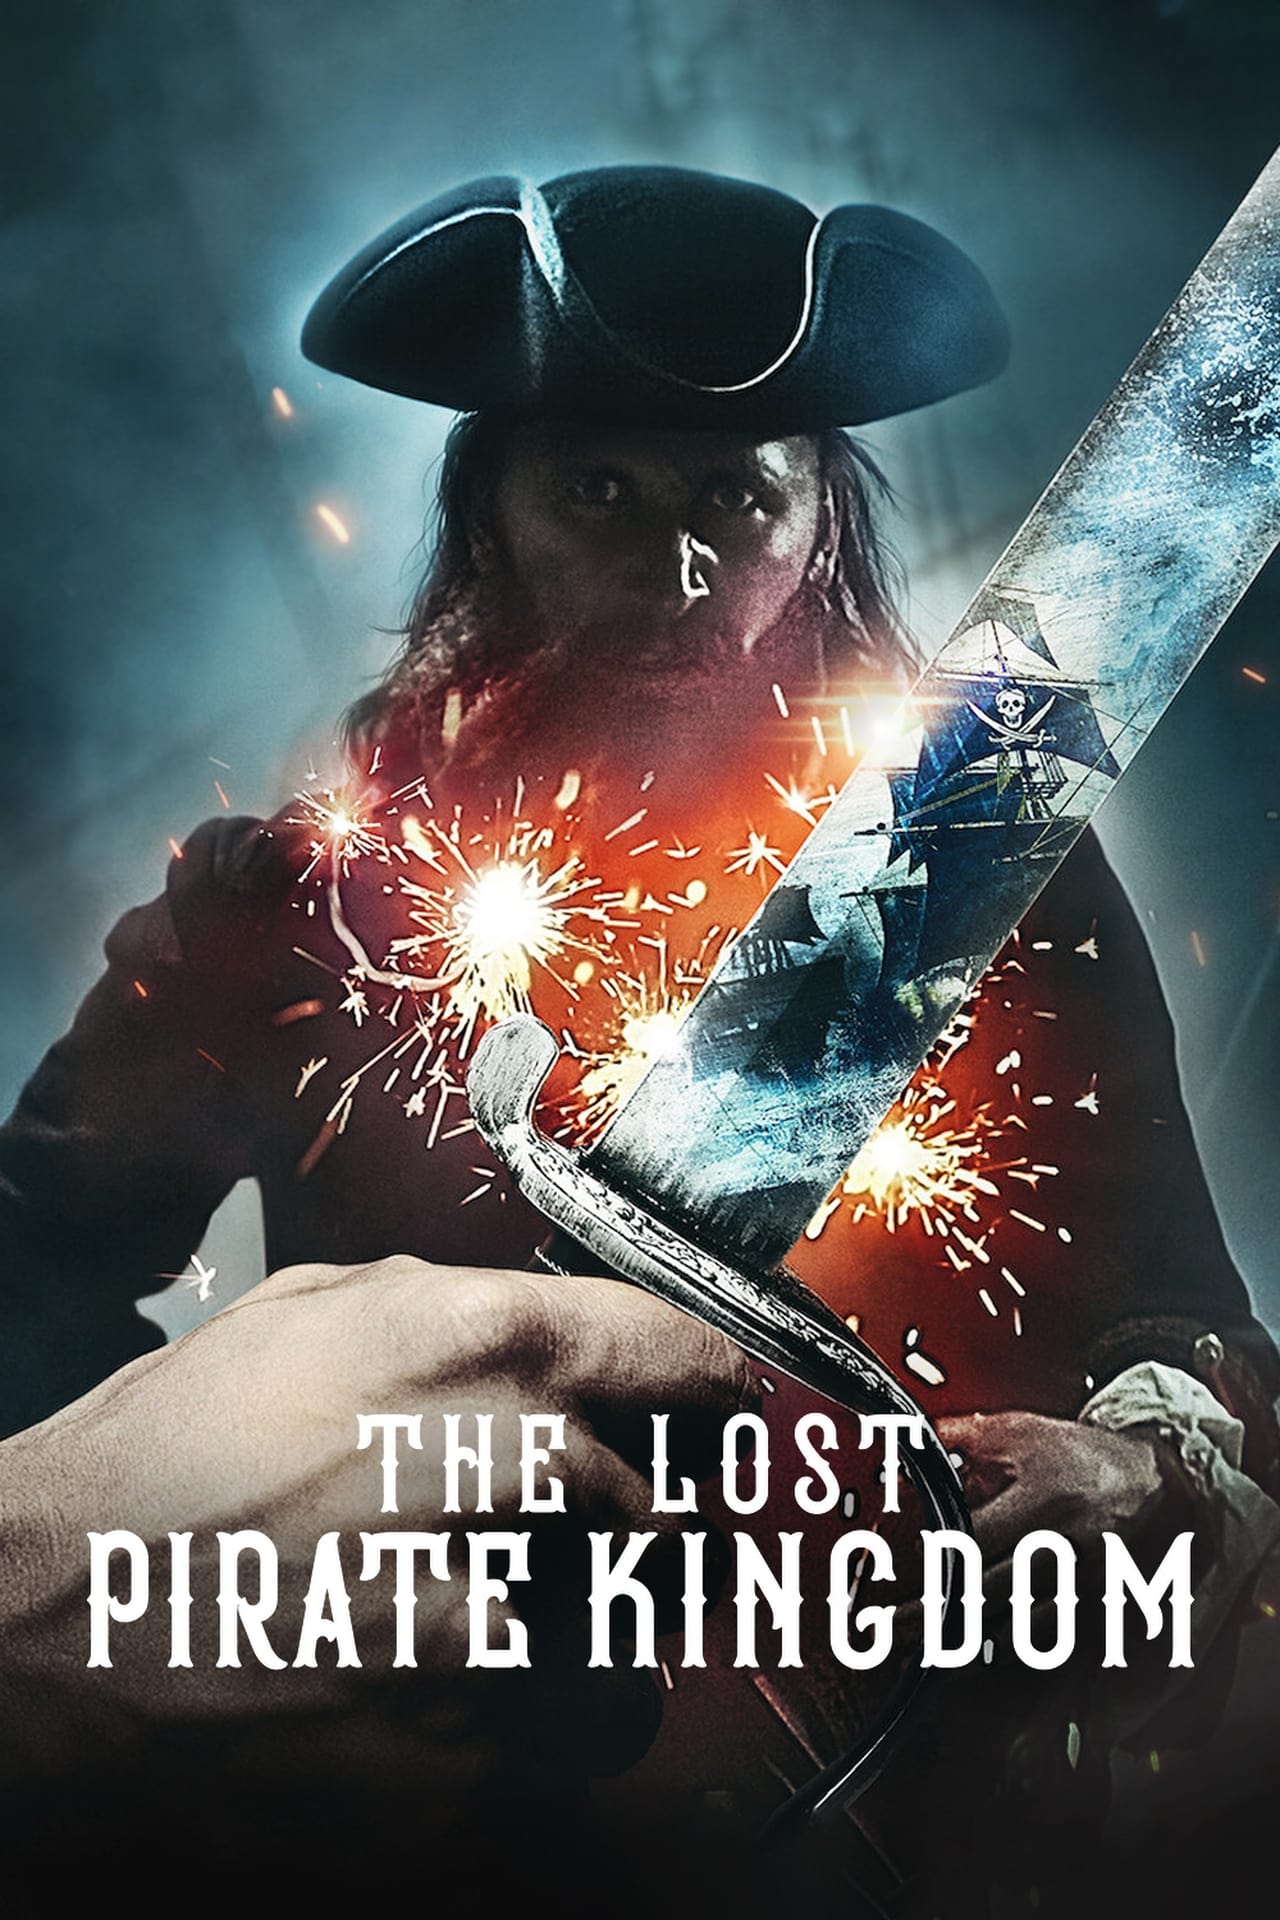 The Lost Pirate Kingdom (2021) S1 EP4 The Empire Strikes Back 640Kbps 25Fps 48Khz 5.1Ch DD+ NF E-AC3 Turkish Audio TAC